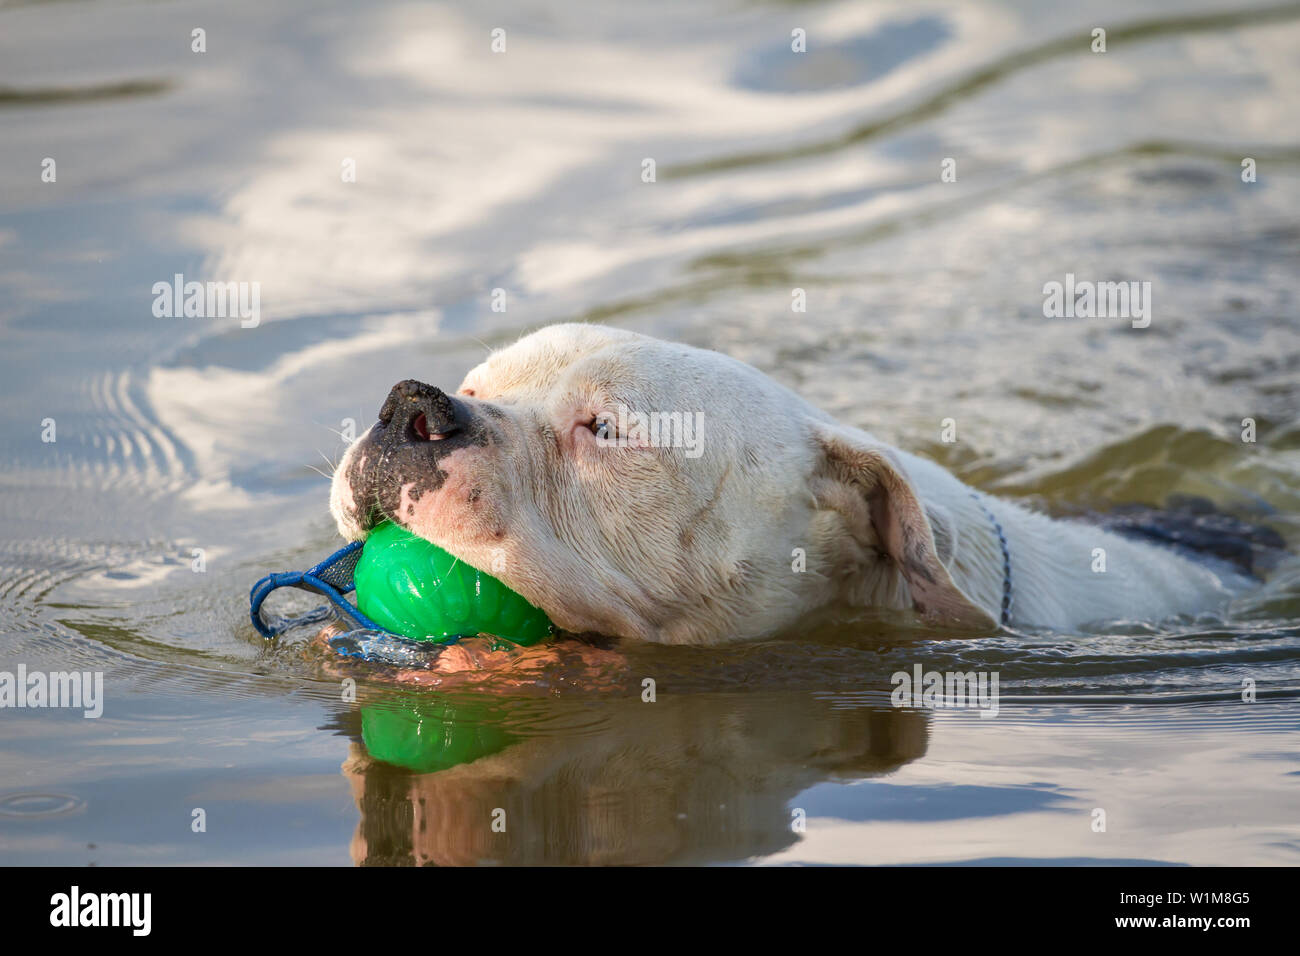 American Bulldog swimming in the water and fetching a toy Stock Photo